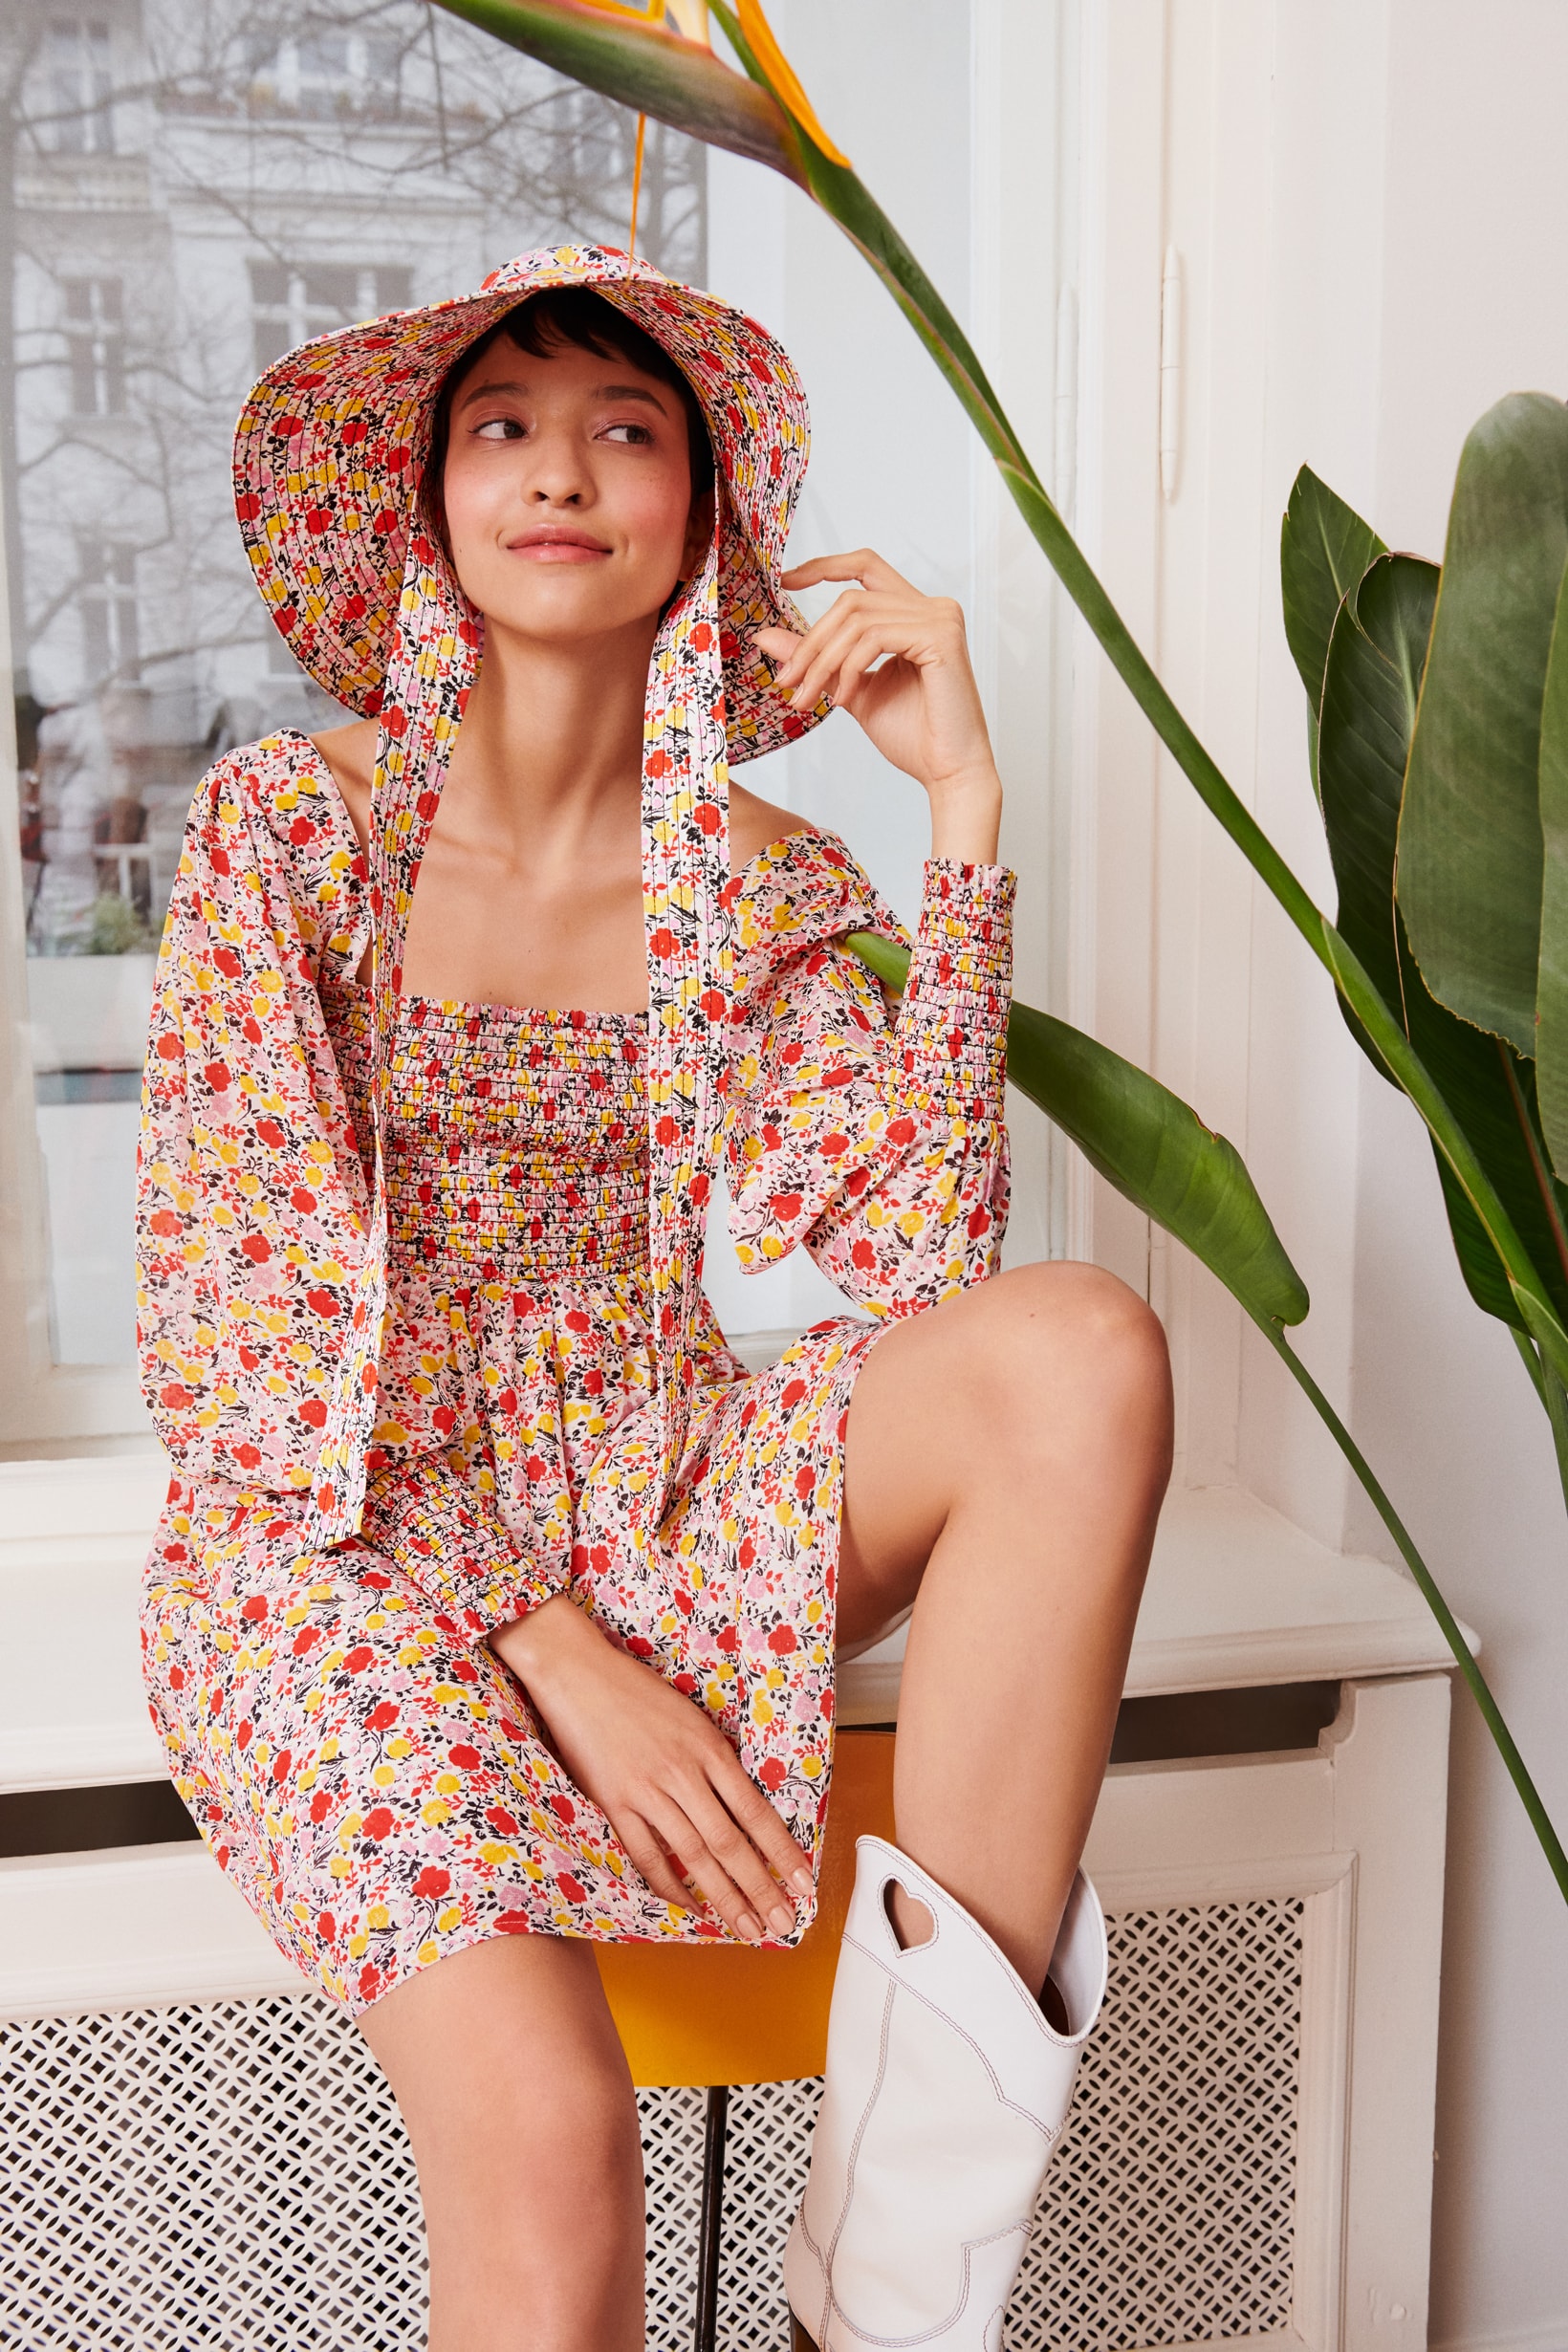 GANNI x mytheresa.com Spring Summer 2019 Capsule Collection Floral Dress Bucket Hat Red Blue Yellow Cowboy Boots White